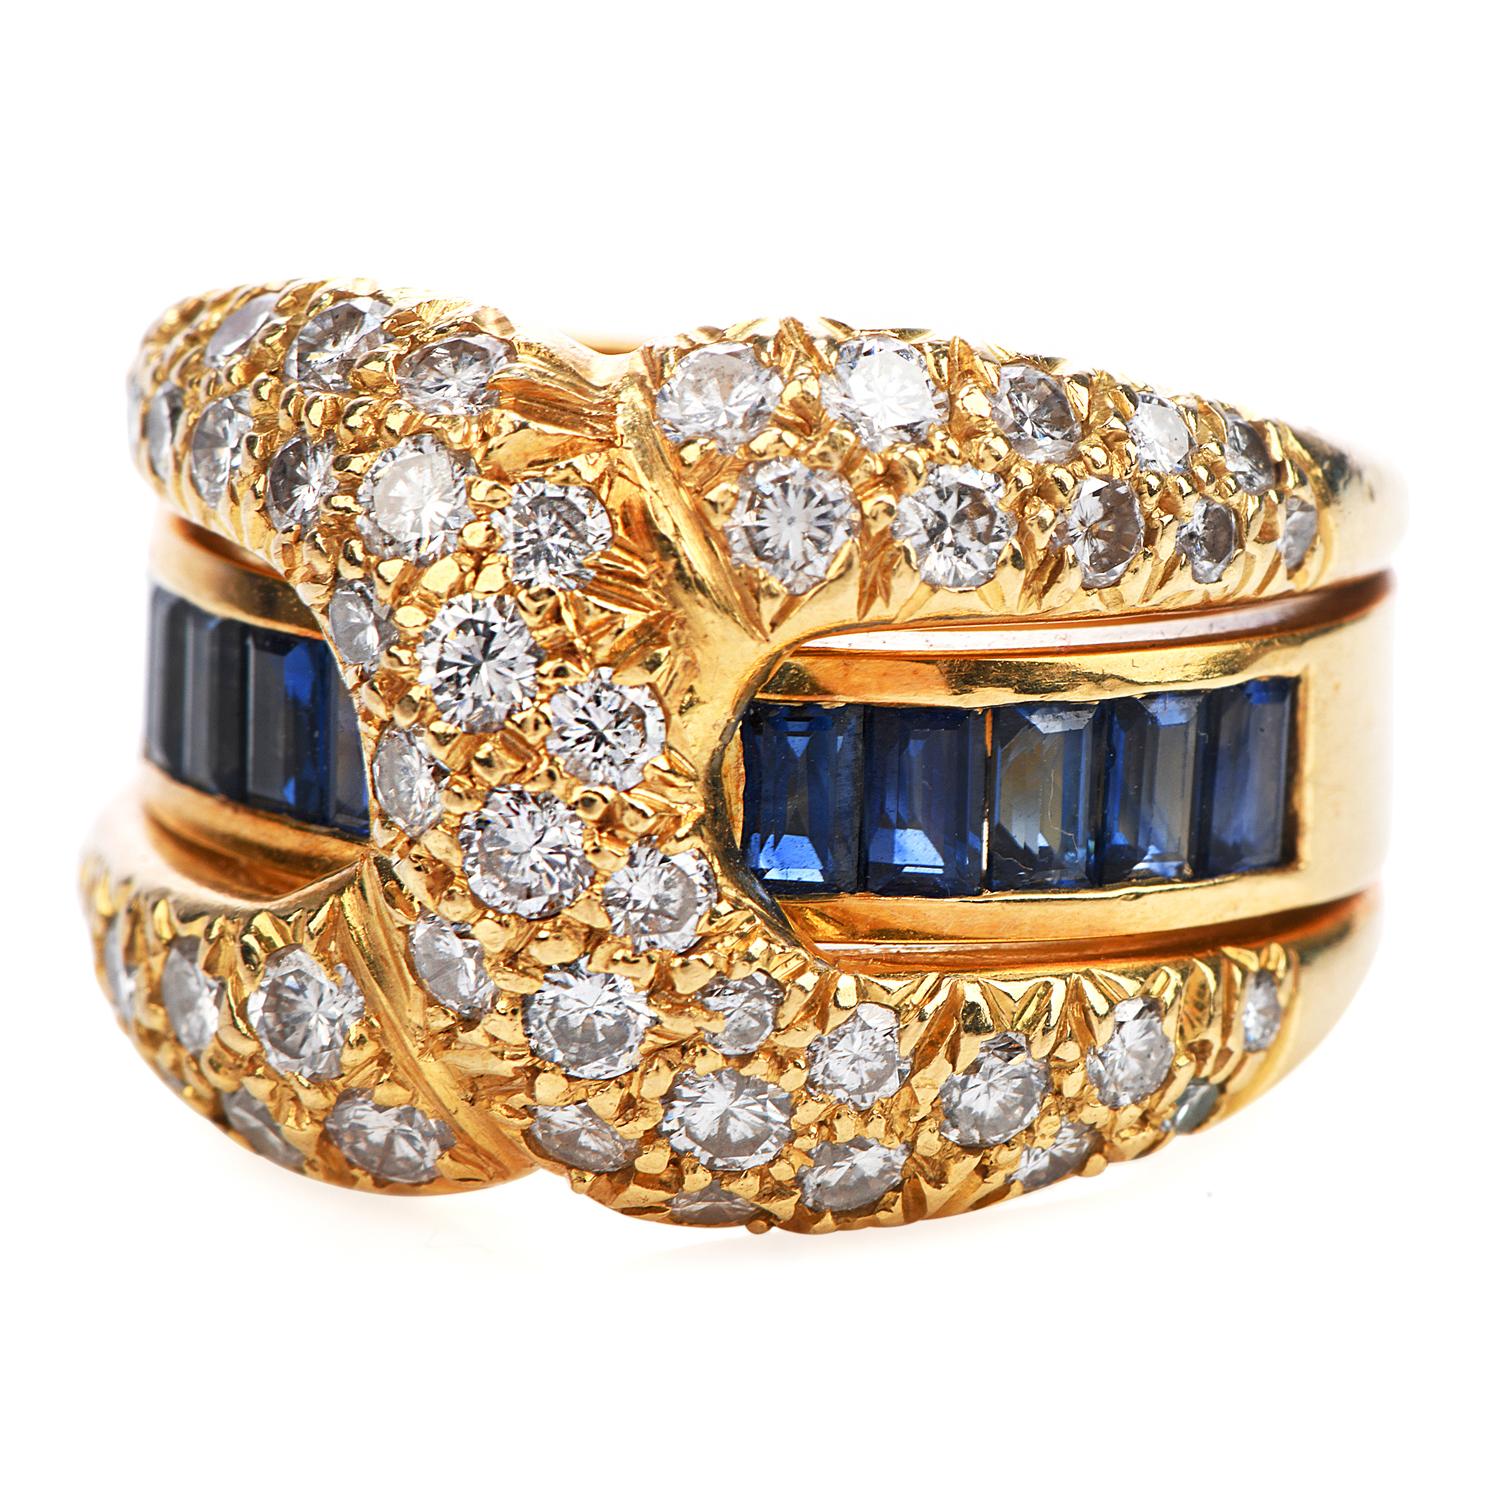 his Excellent Condition Band Ring is inspired in a X Design

and crafted in Solid Heavy 18K Yellow Gold.

The Sparkle of the piece is given by 51 Cluster Round cut Diamonds weighing approximately 1.50 carats,

 H-I color and VS-SI  clarity.

As